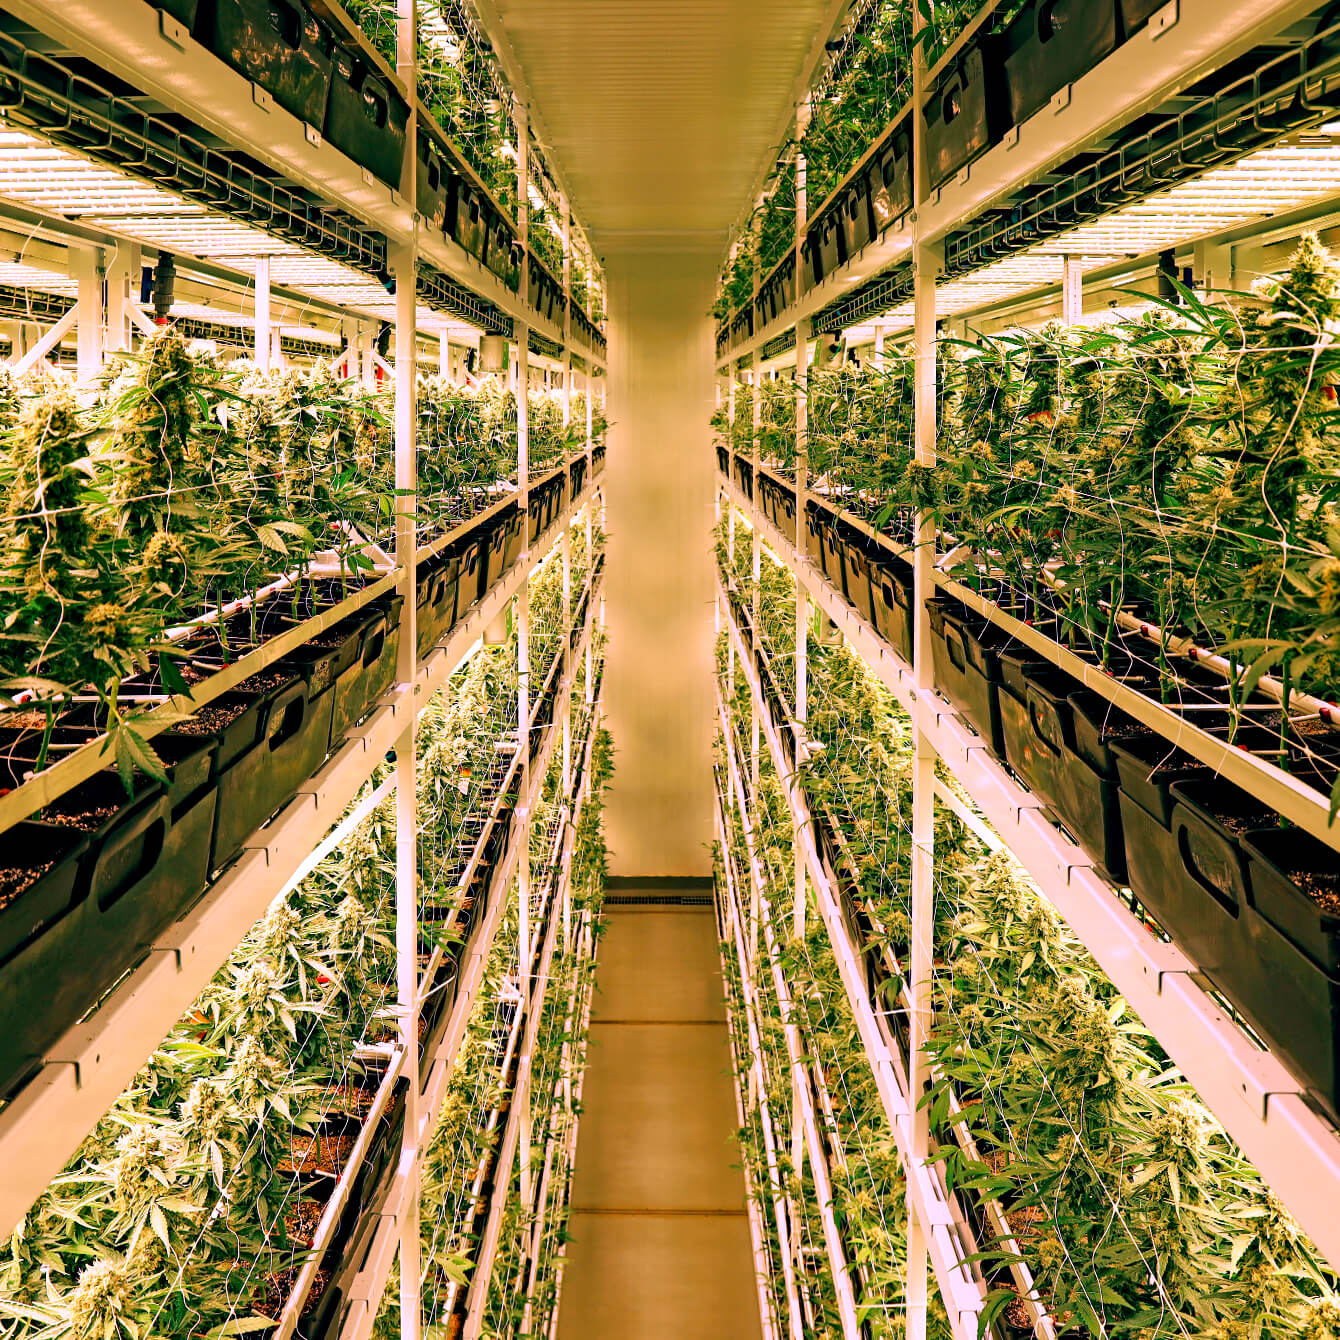 Image of GreenSeal's vertical grow system